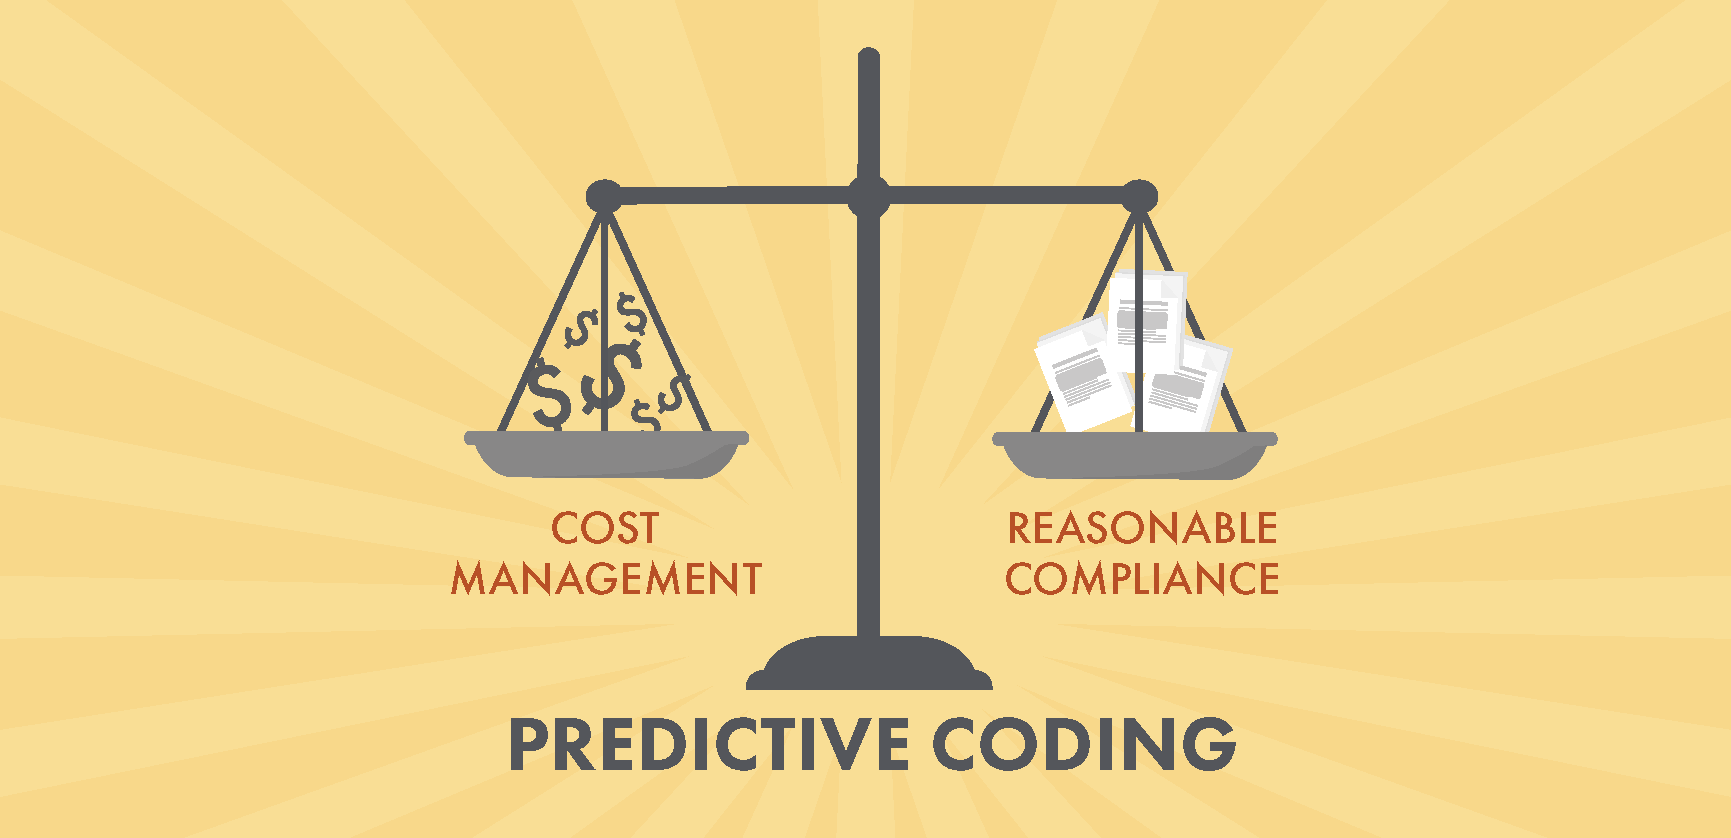 Predictive Coding provides balance for cost management and reasonable compliance